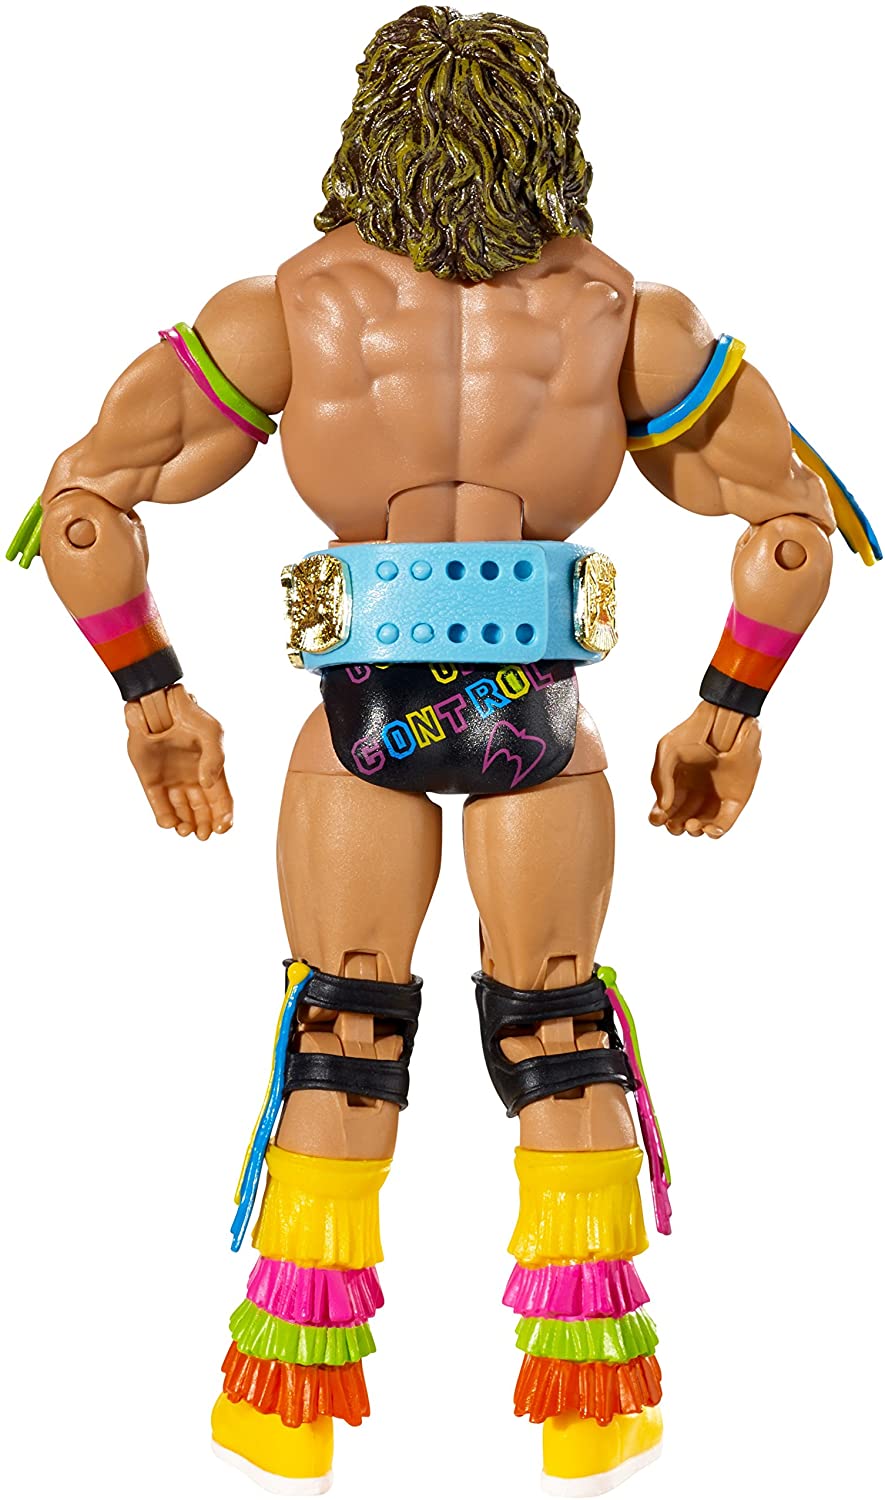 2014 WWE Mattel Elite Collection Hall of Fame Series 1 Ultimate Warrior [Exclusive]